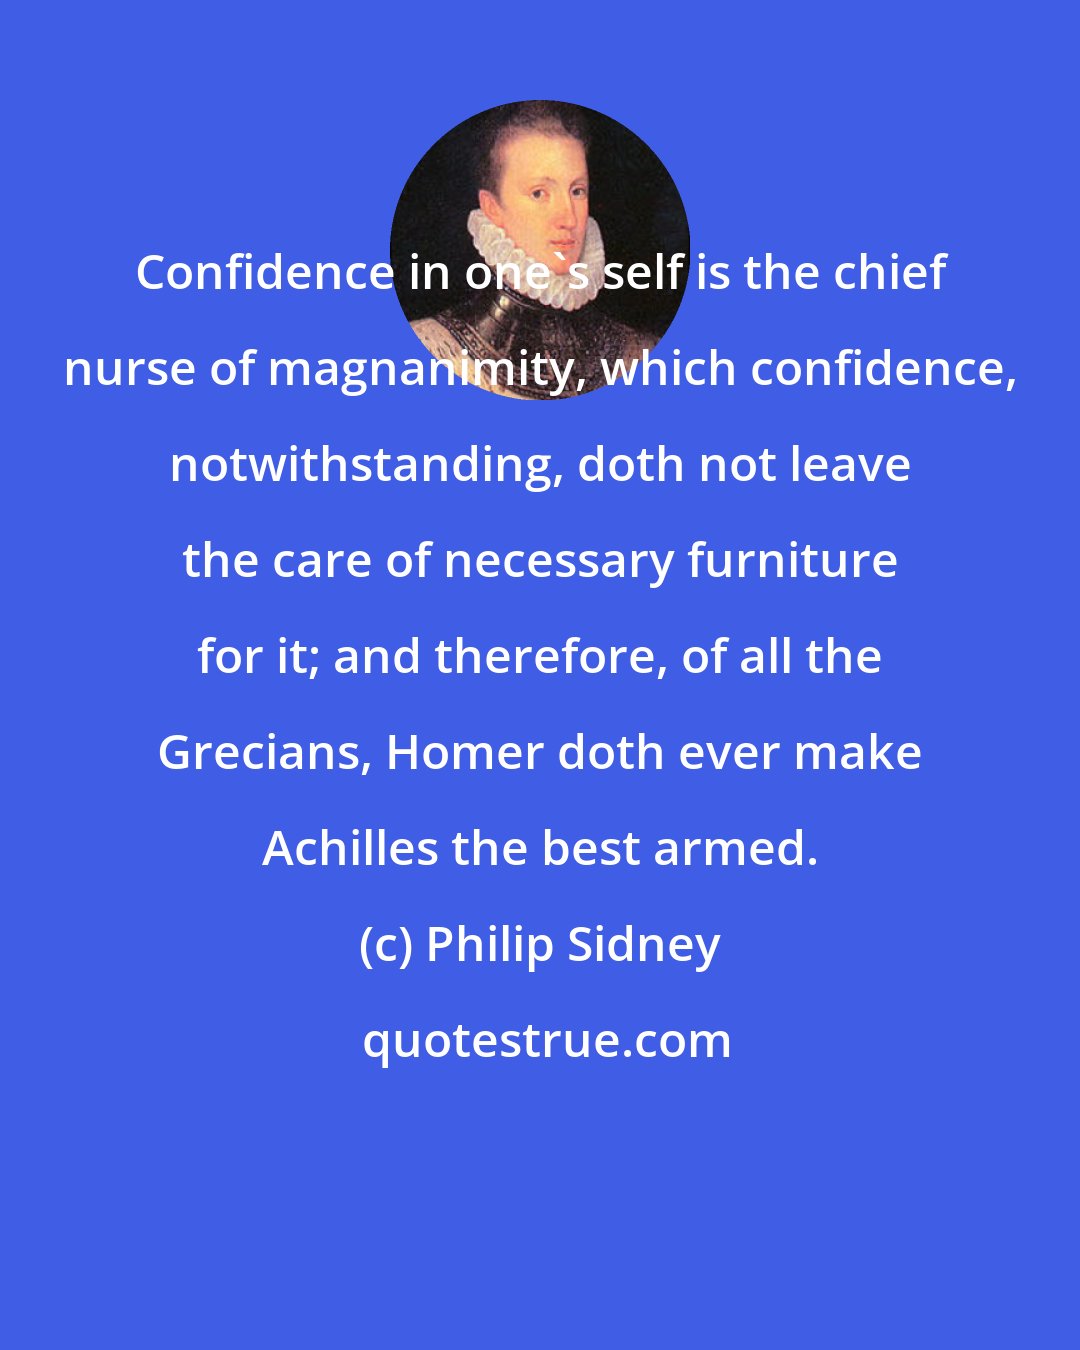 Philip Sidney: Confidence in one's self is the chief nurse of magnanimity, which confidence, notwithstanding, doth not leave the care of necessary furniture for it; and therefore, of all the Grecians, Homer doth ever make Achilles the best armed.